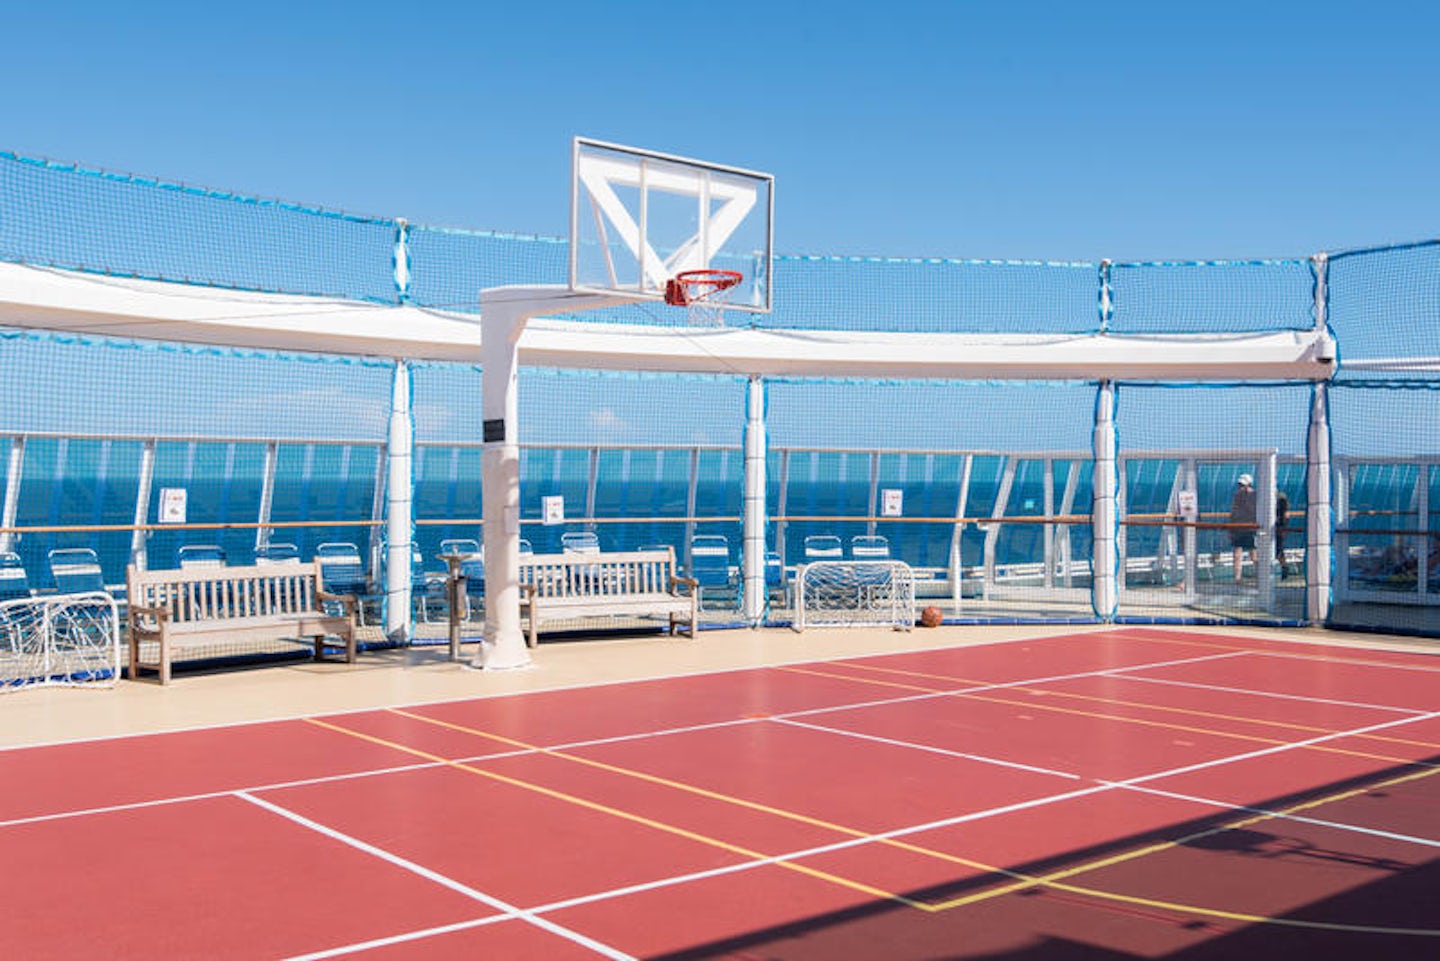 Sports Court on Royal Caribbean Serenade of the Seas Cruise Ship